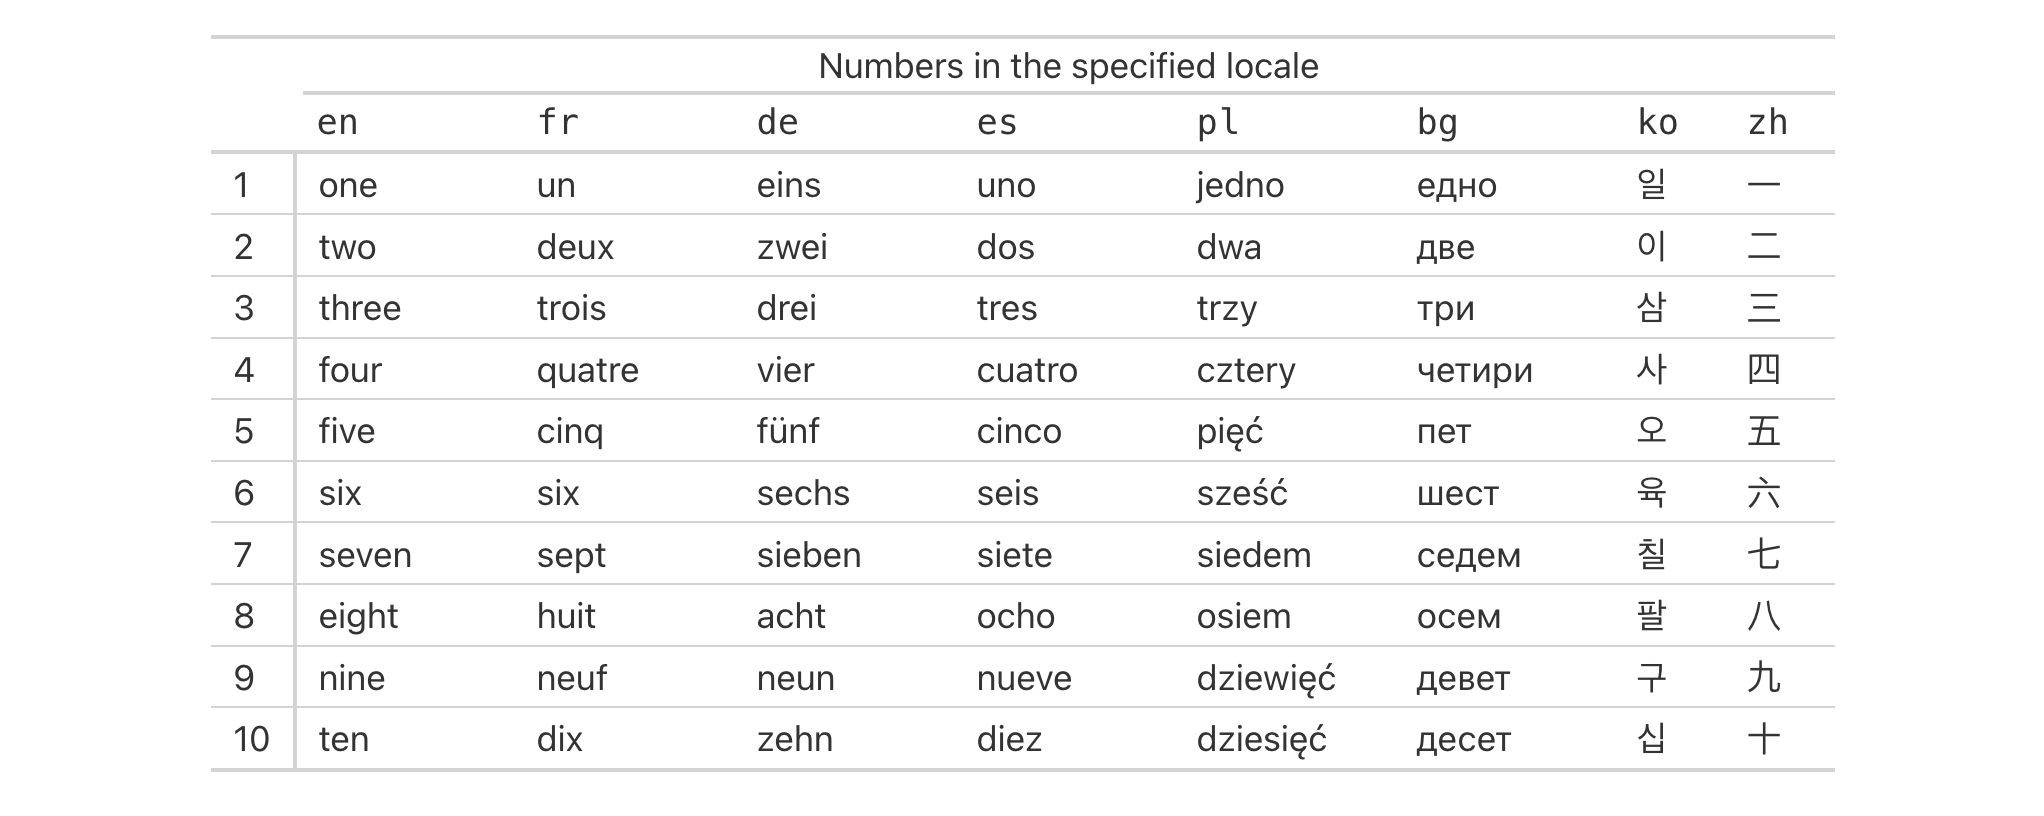 This image of a table was generated from the third code example in the `fmt_spelled_num()` help file.